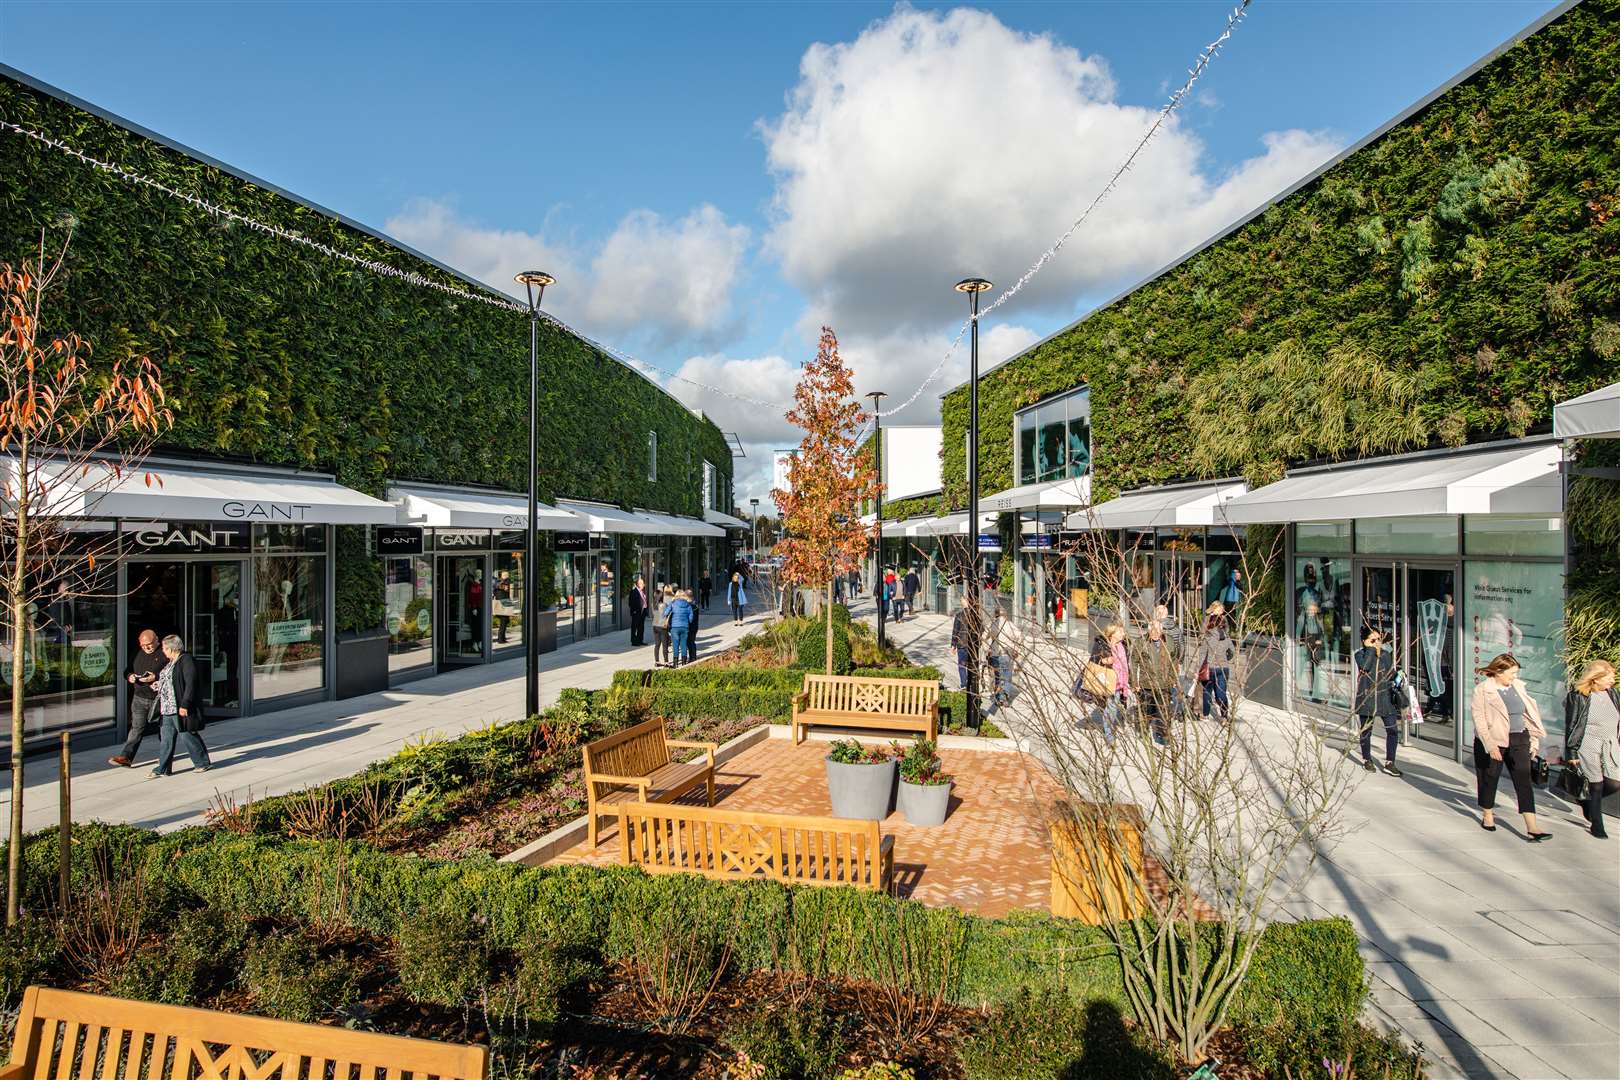 The new "living wall" at the Ashford Designer Outlet